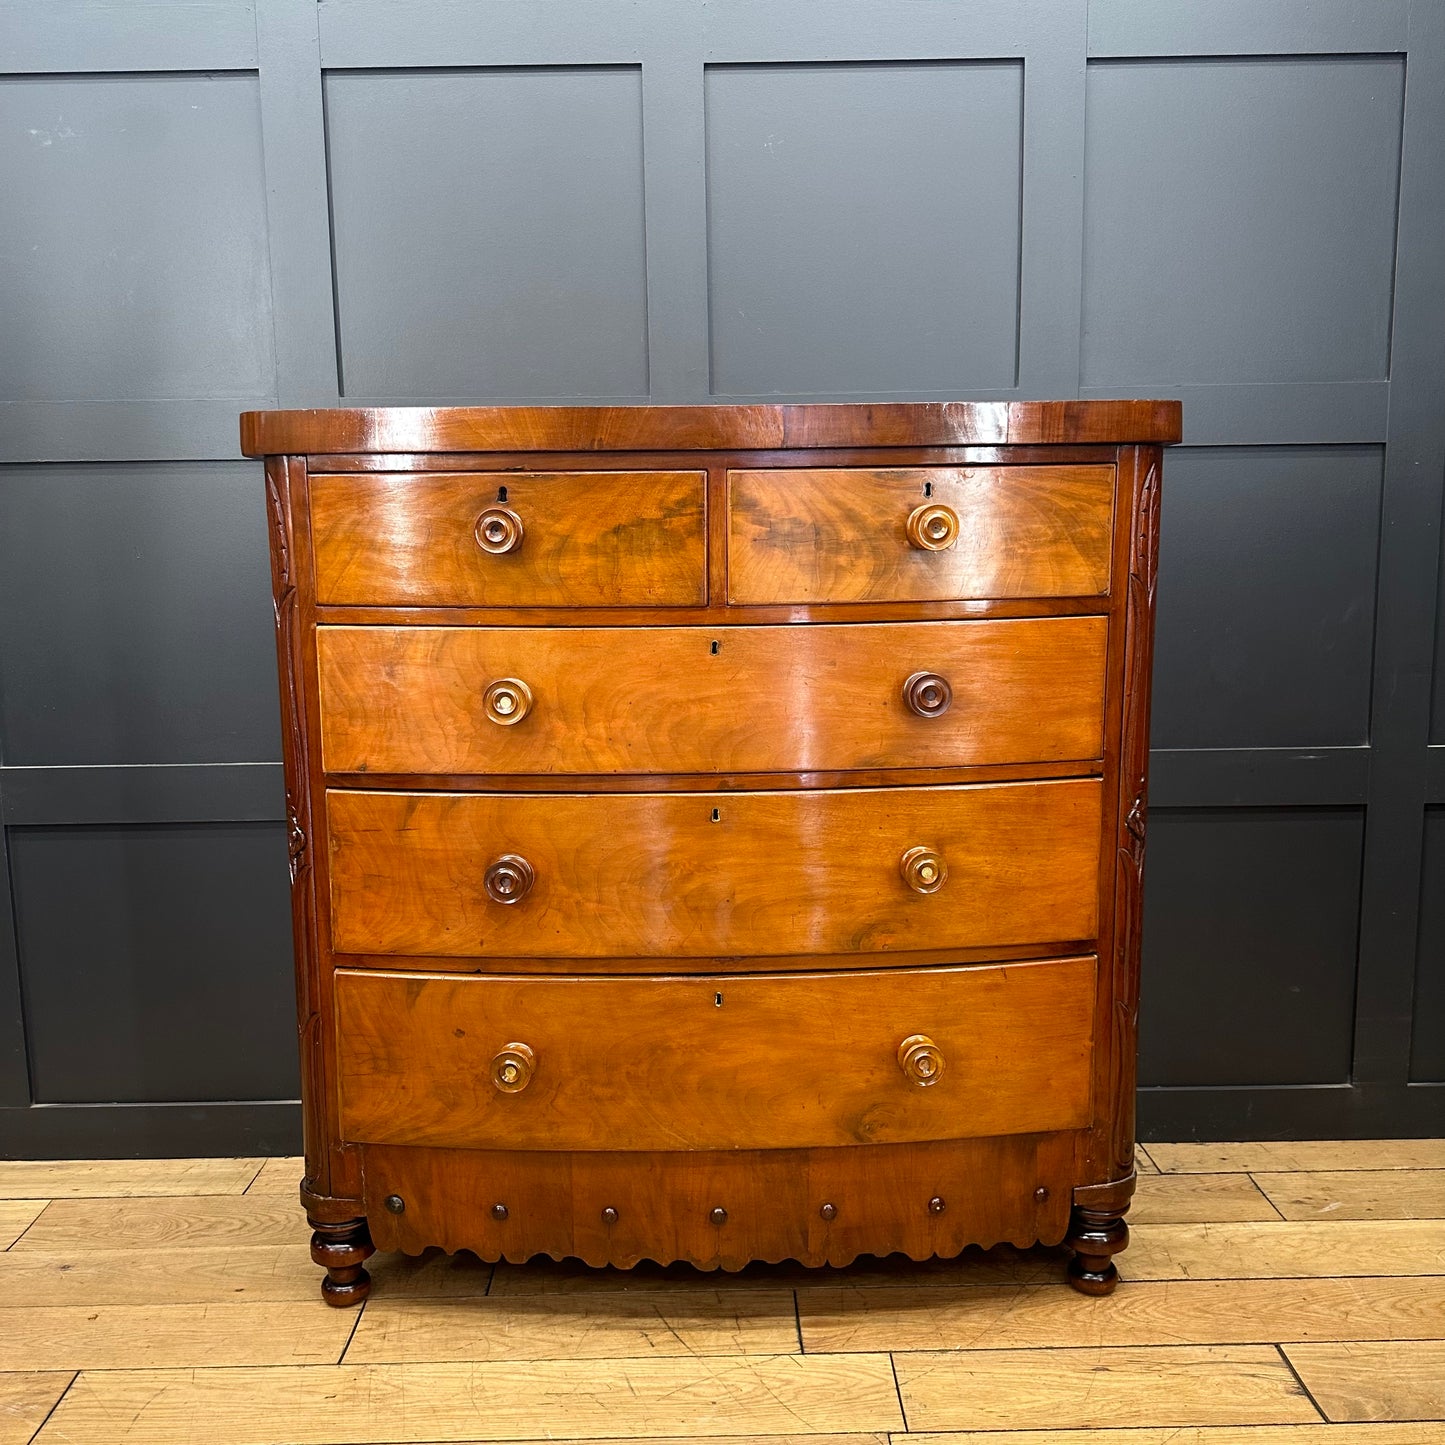 Antique Large Victorian Chest Of Drawers / Bedroom storage / Mahogany Drawers